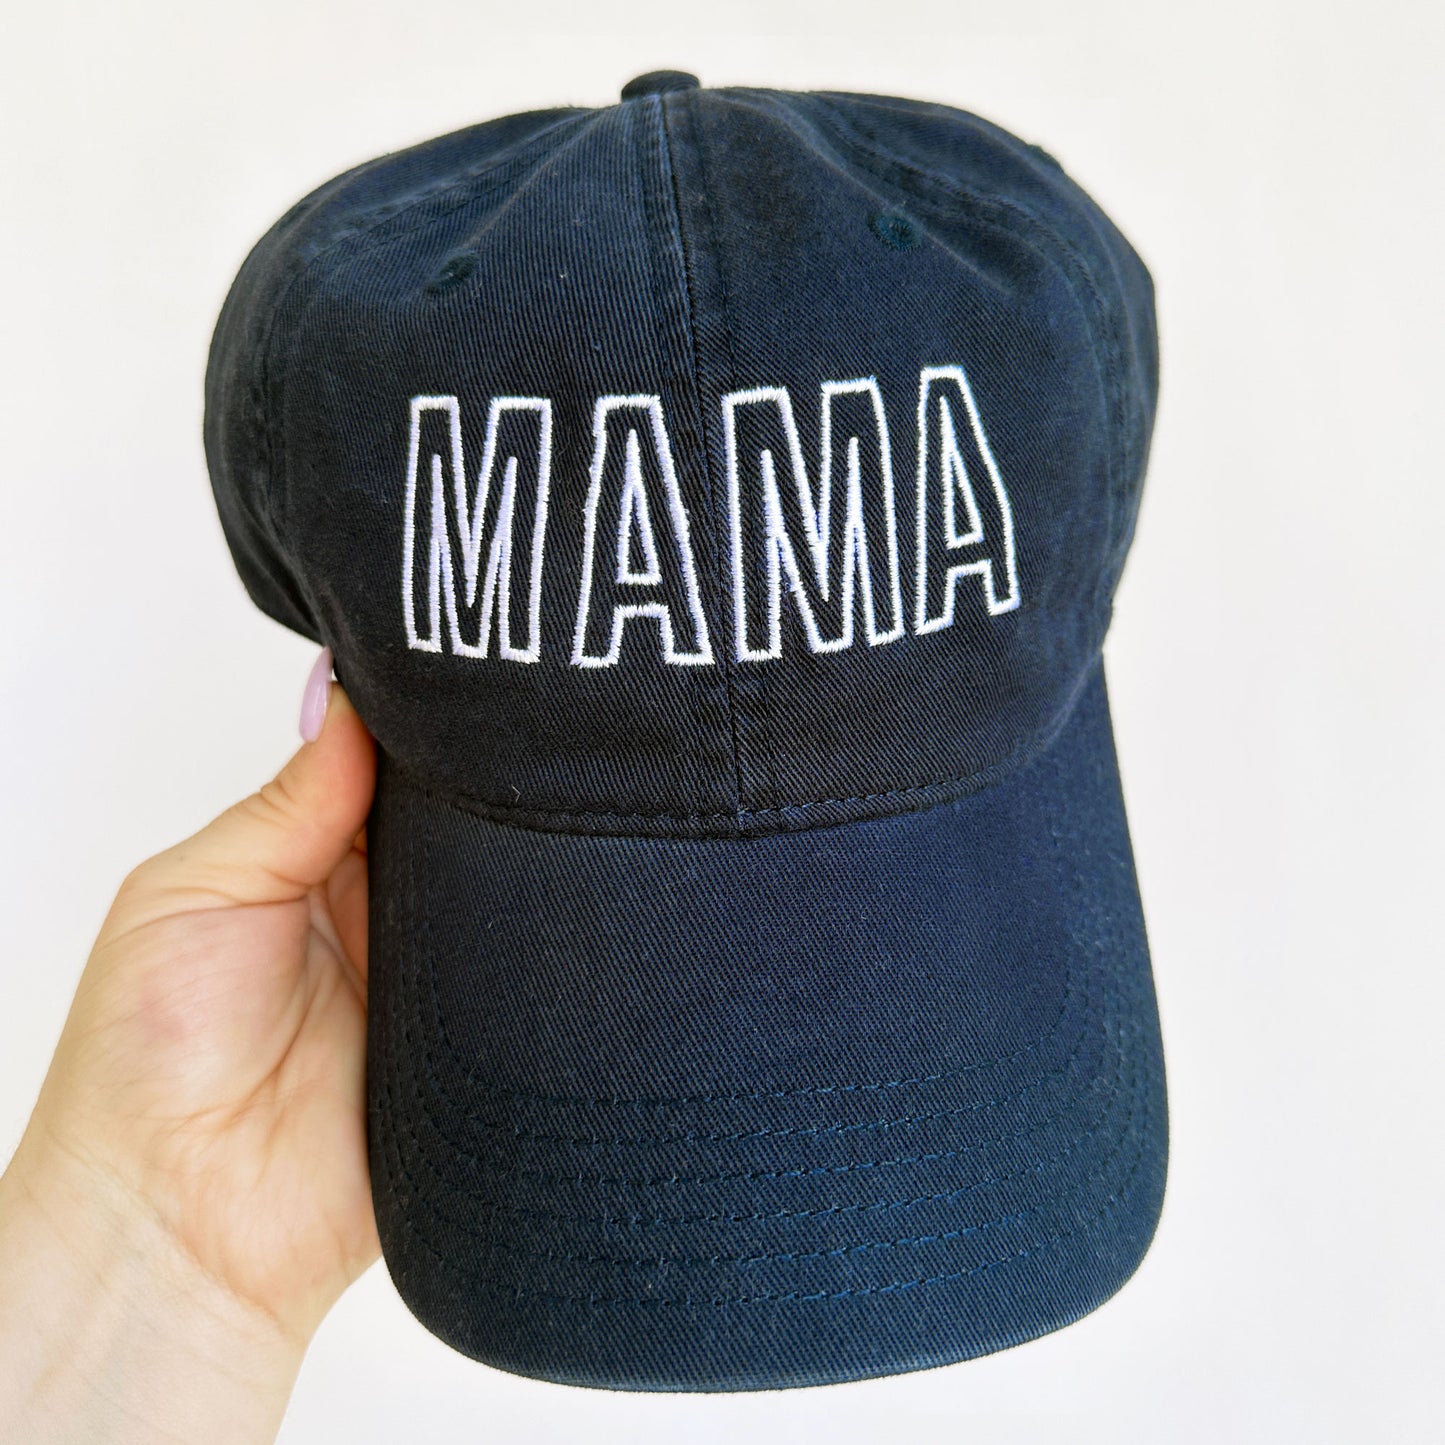 Cute navy baseball hat with mama embroidered across the front in an open block font